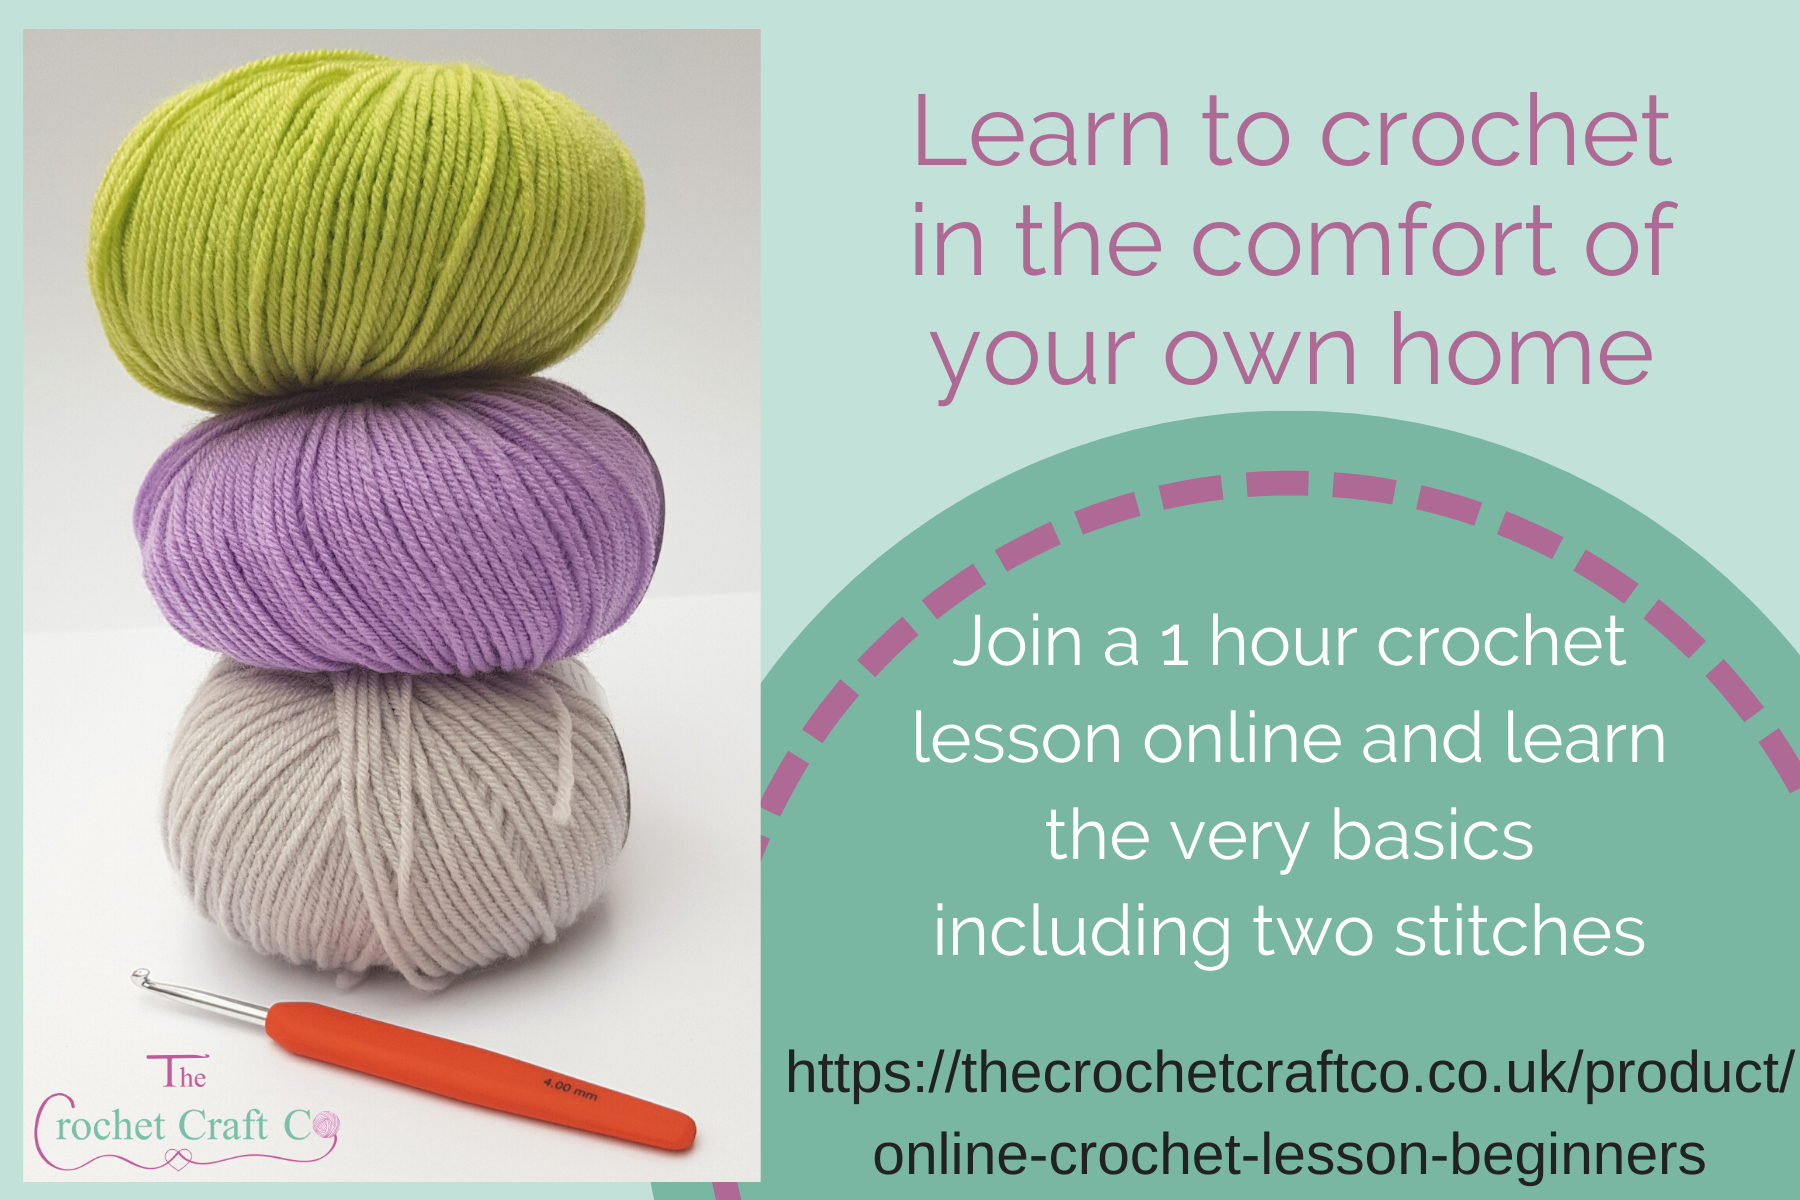 Online Group Crochet Lesson 1 Hour The Crochet Craft Co,Picture Of A Rational Number